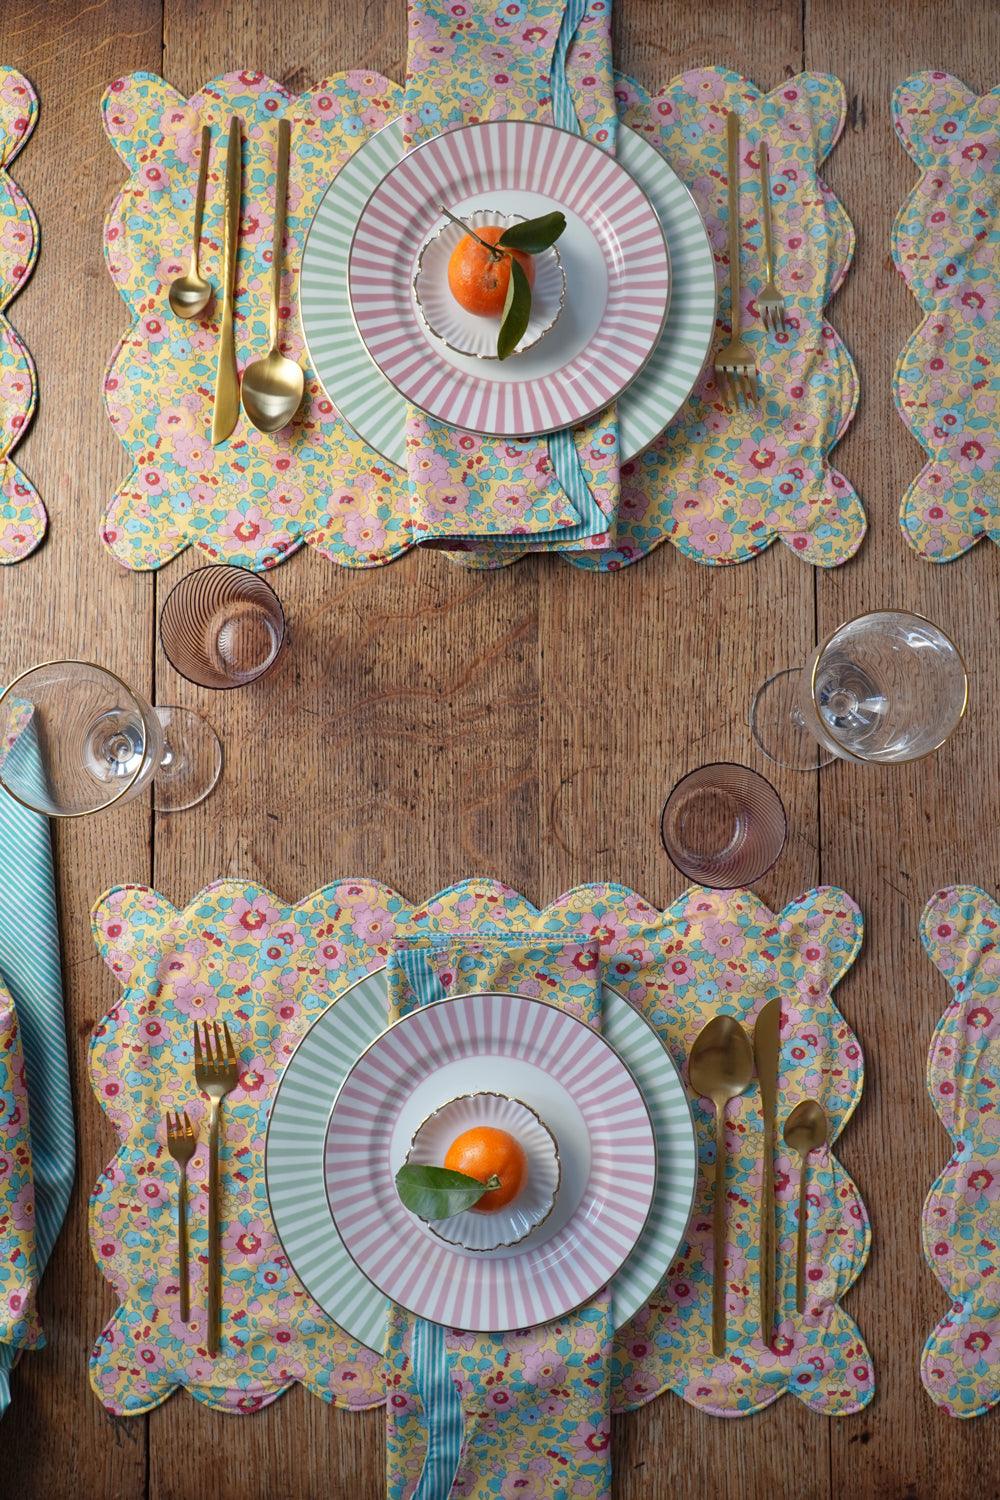 Reversible Wavy Napkin Set made with Liberty Fabric BETSY & ELEMENTS - Coco & Wolf